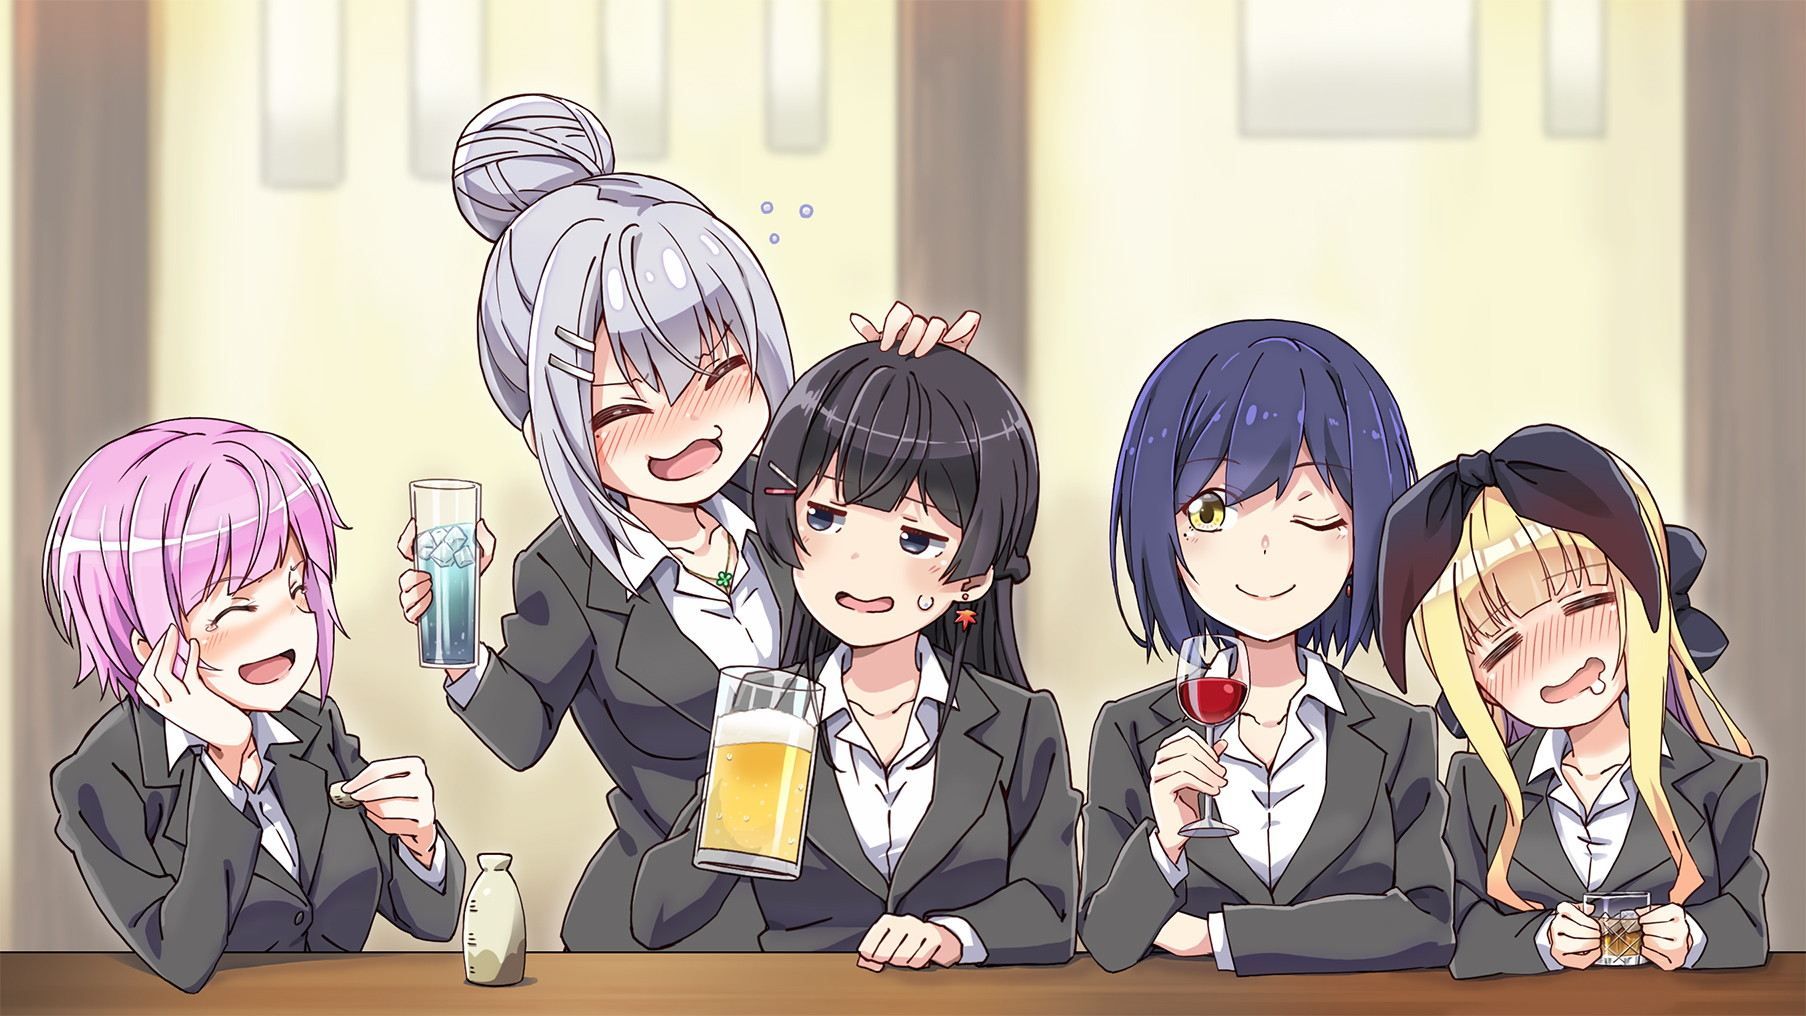 Drunk / alcohol related erotic &amp; moe image summary! 6